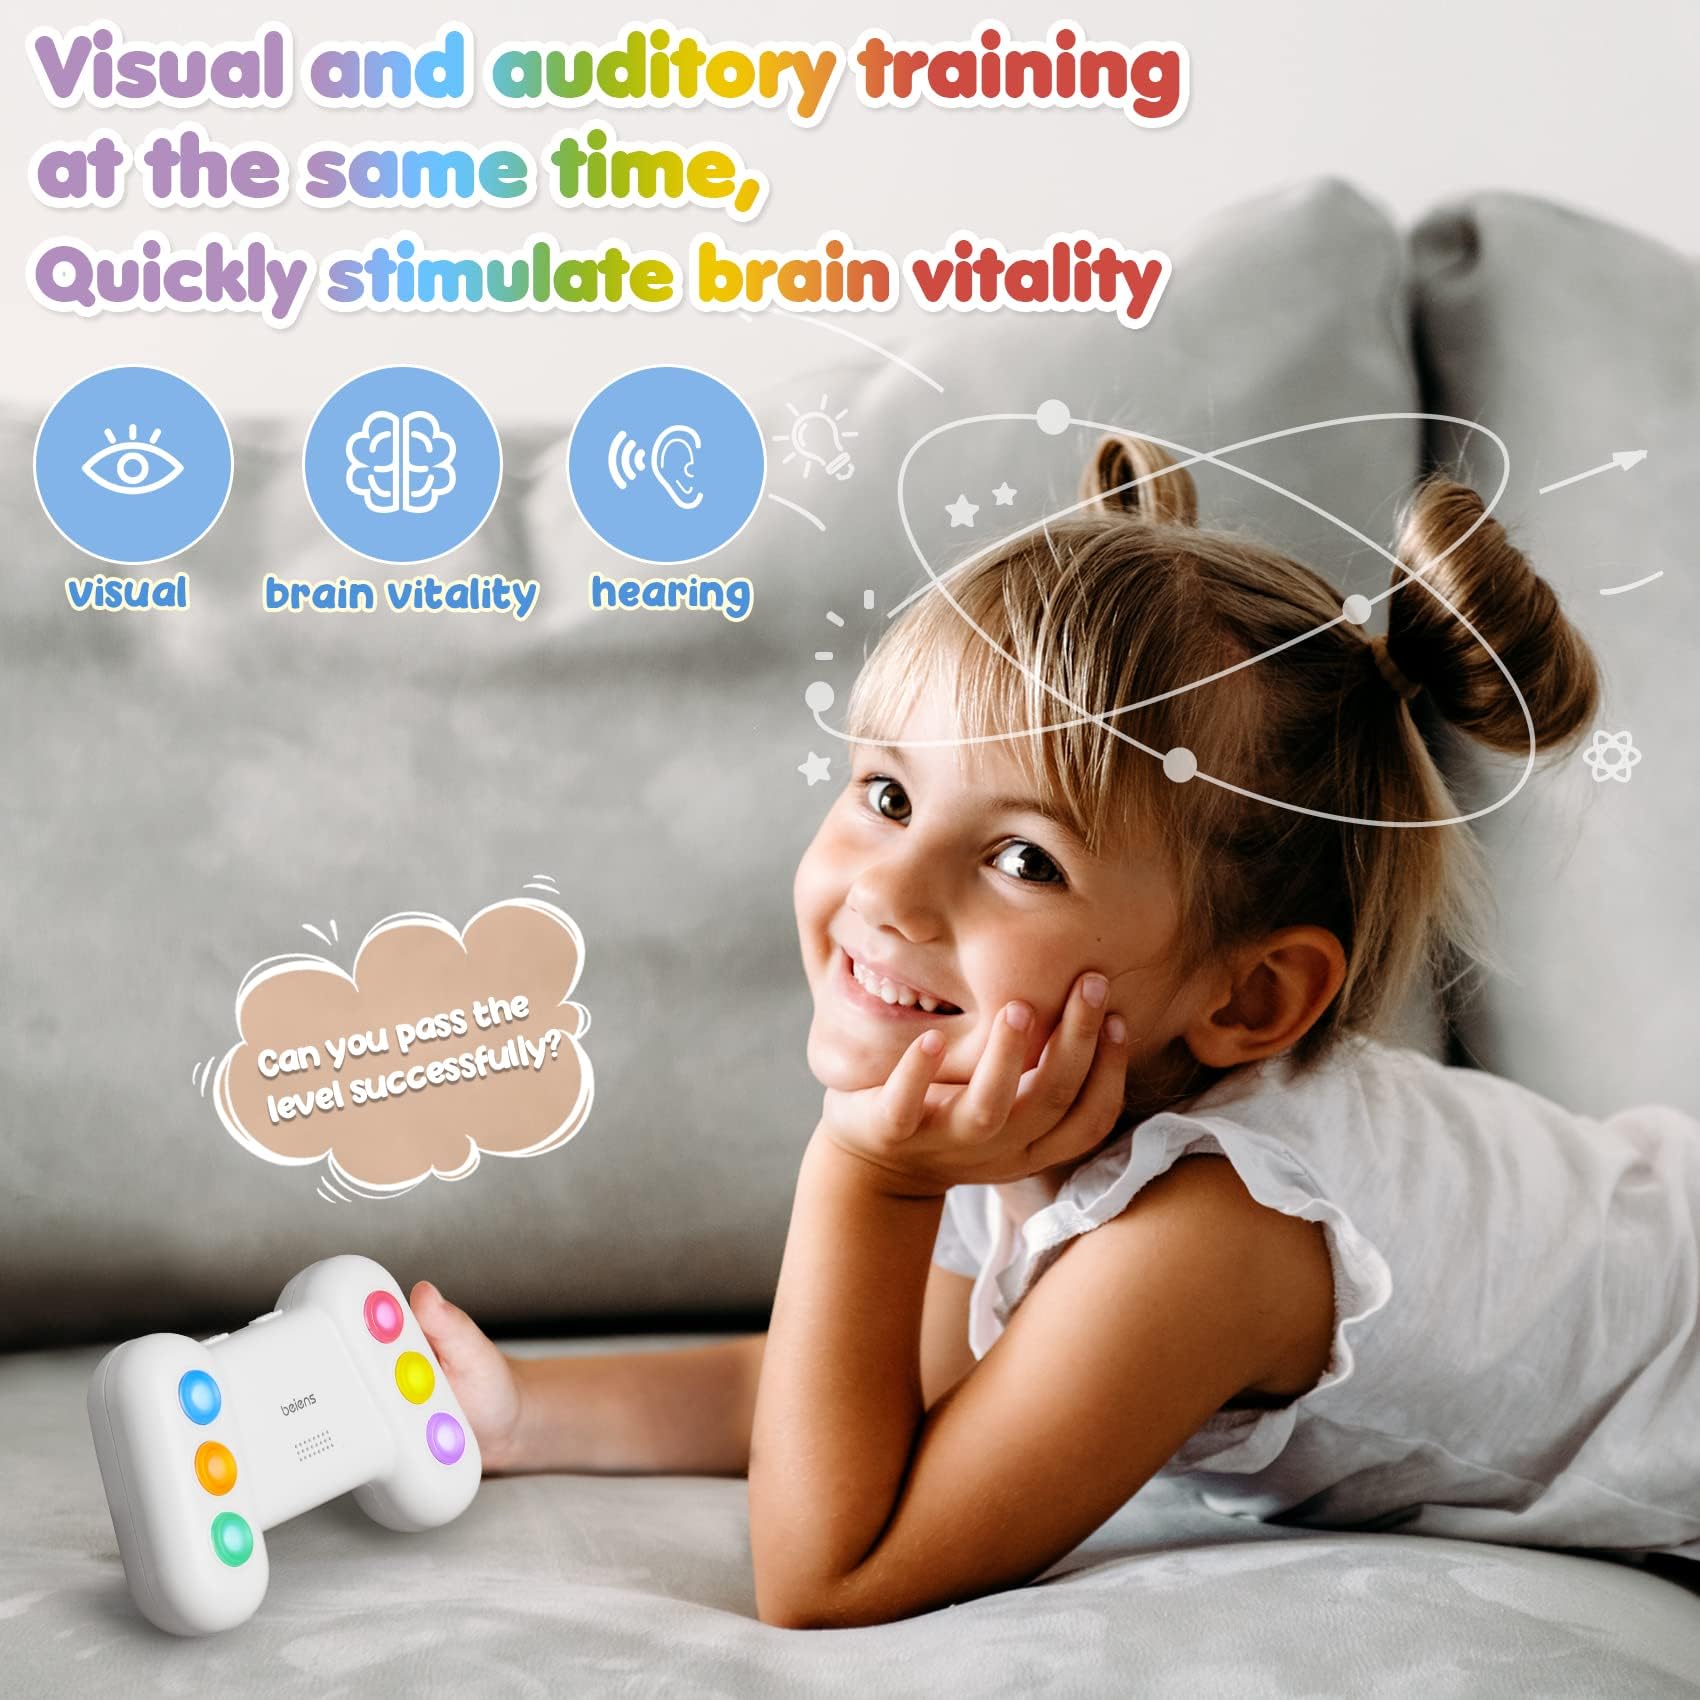 Kids Toys for 2 3 4 5 6 Year Old Boy Girl Sensory Toys Electronic Memory Game with Music and Lights, 4 Modes Simon Game Handheld Travel Toy Christmas Birthday Gift for Toddler Toys Age 2+